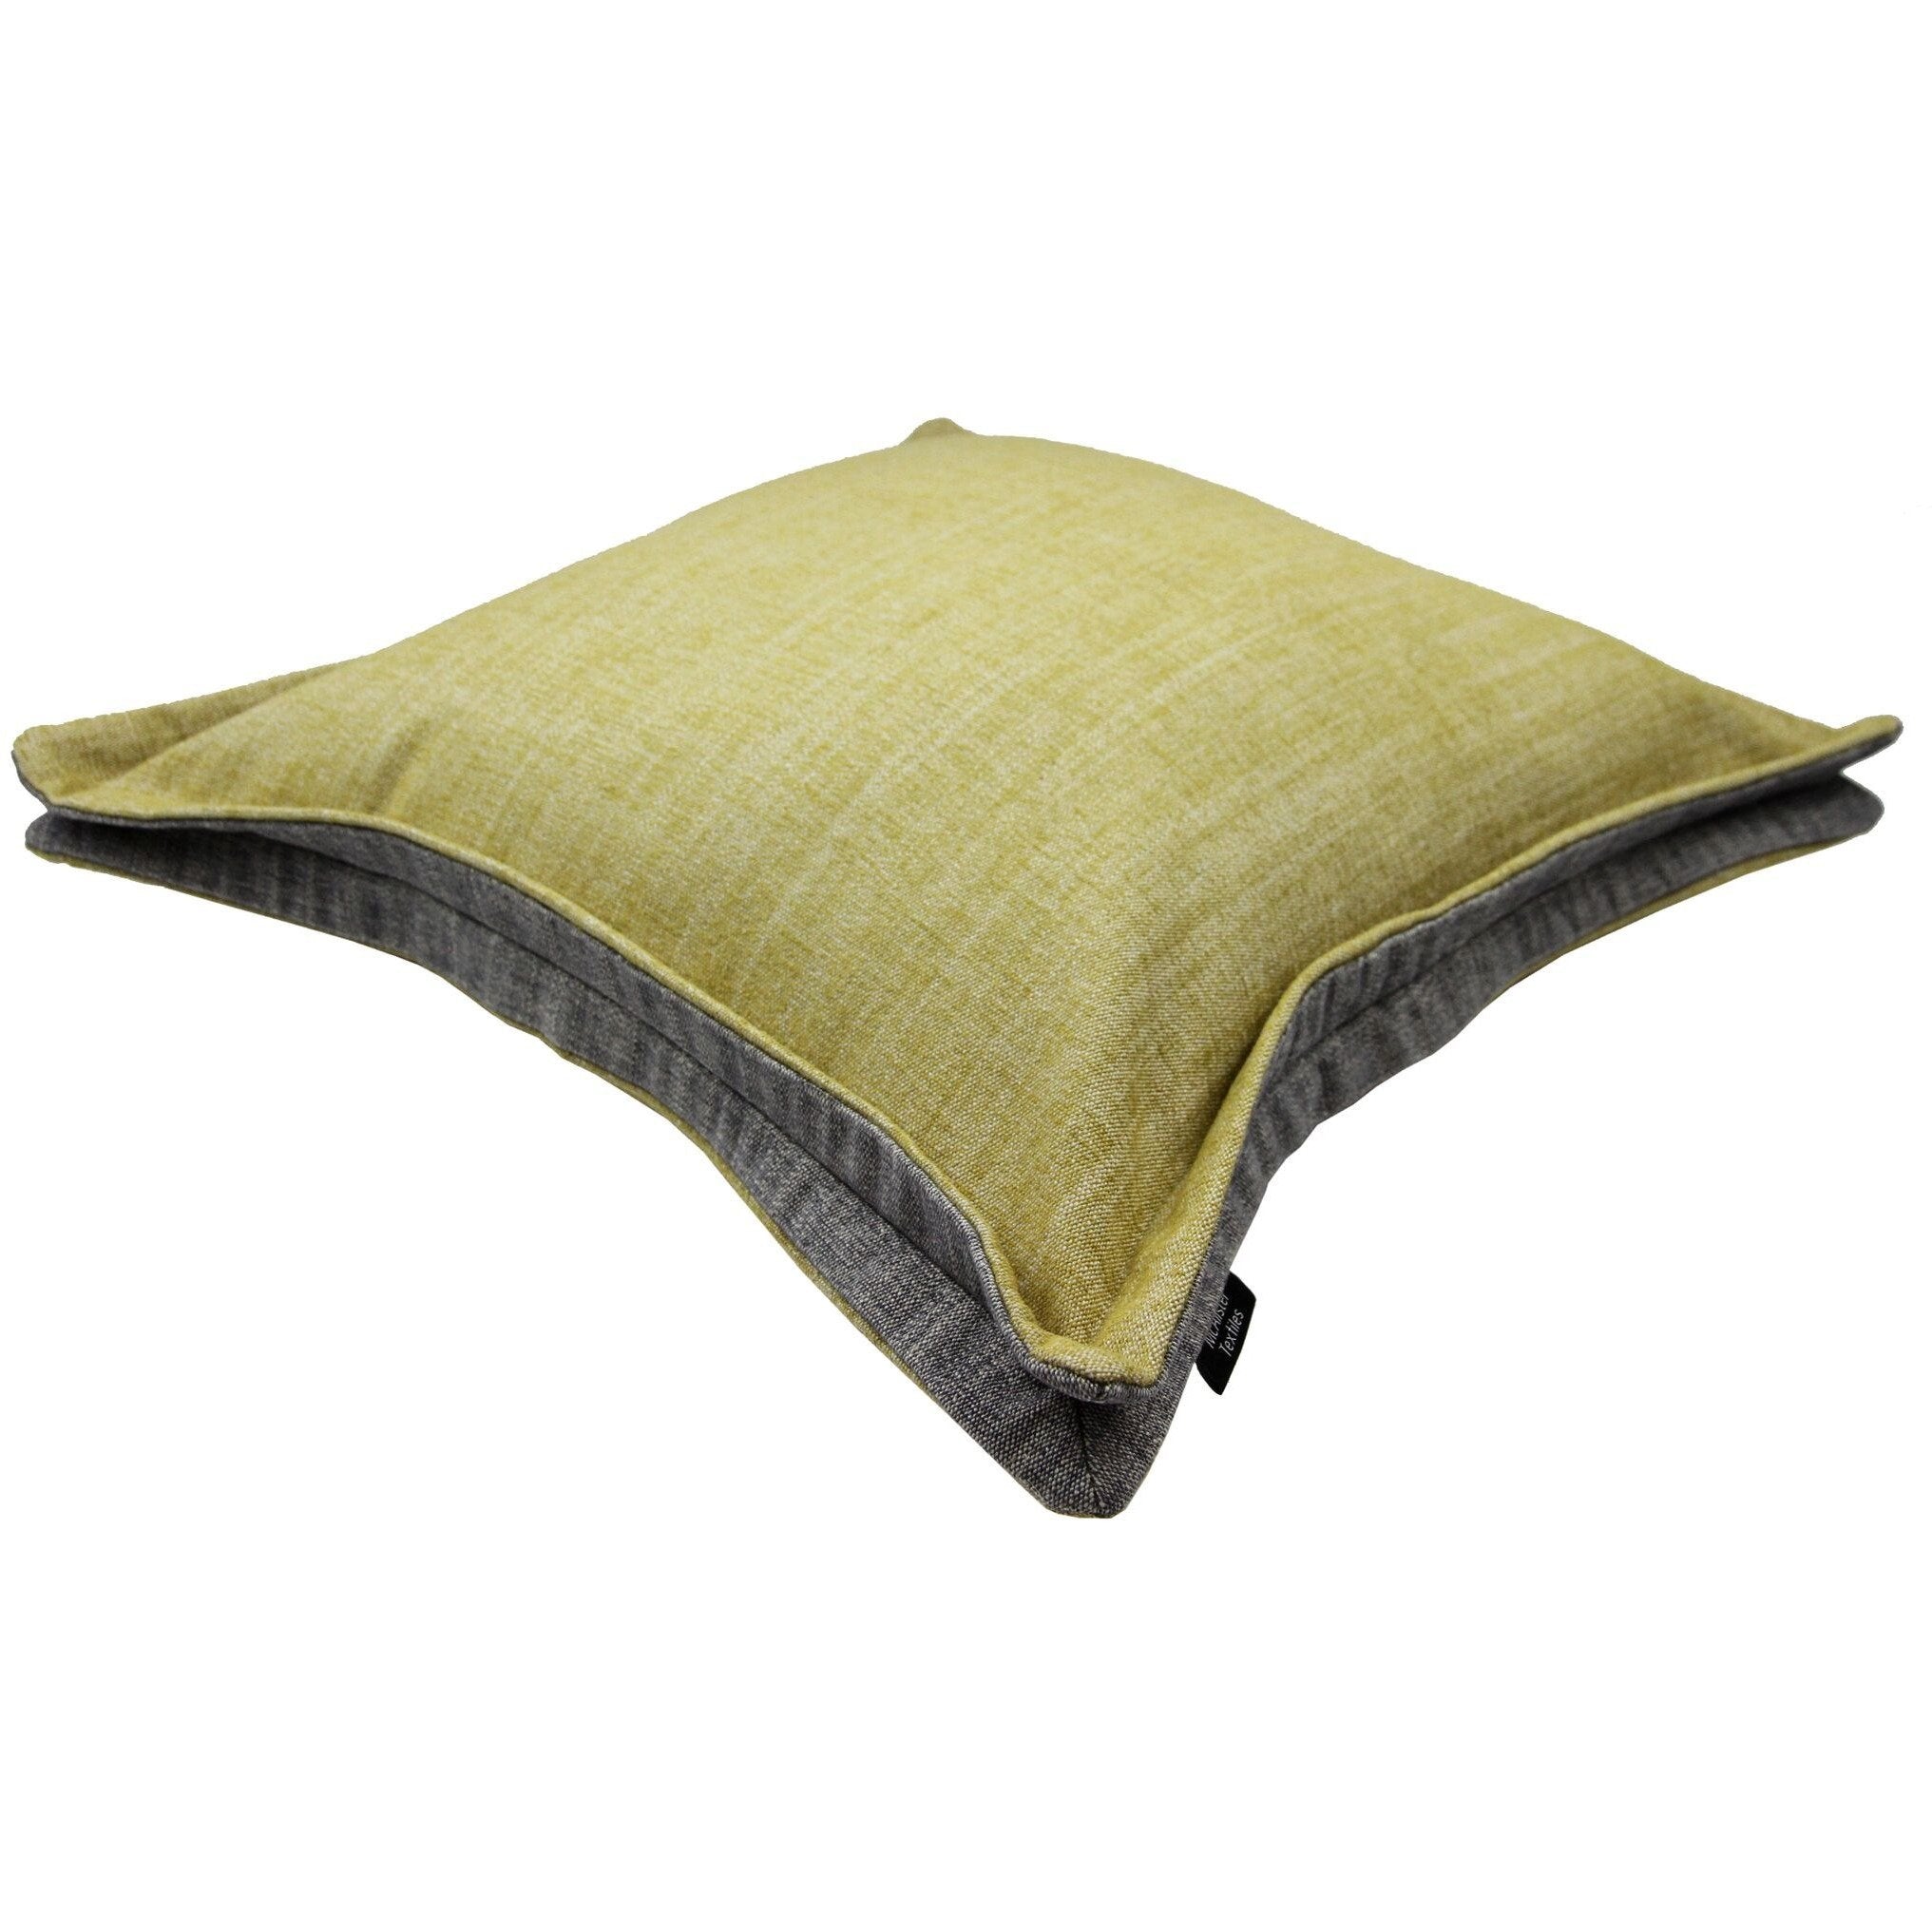 McAlister Textiles Rhumba Accent Ochre Yellow + Grey Cushion Cushions and Covers 